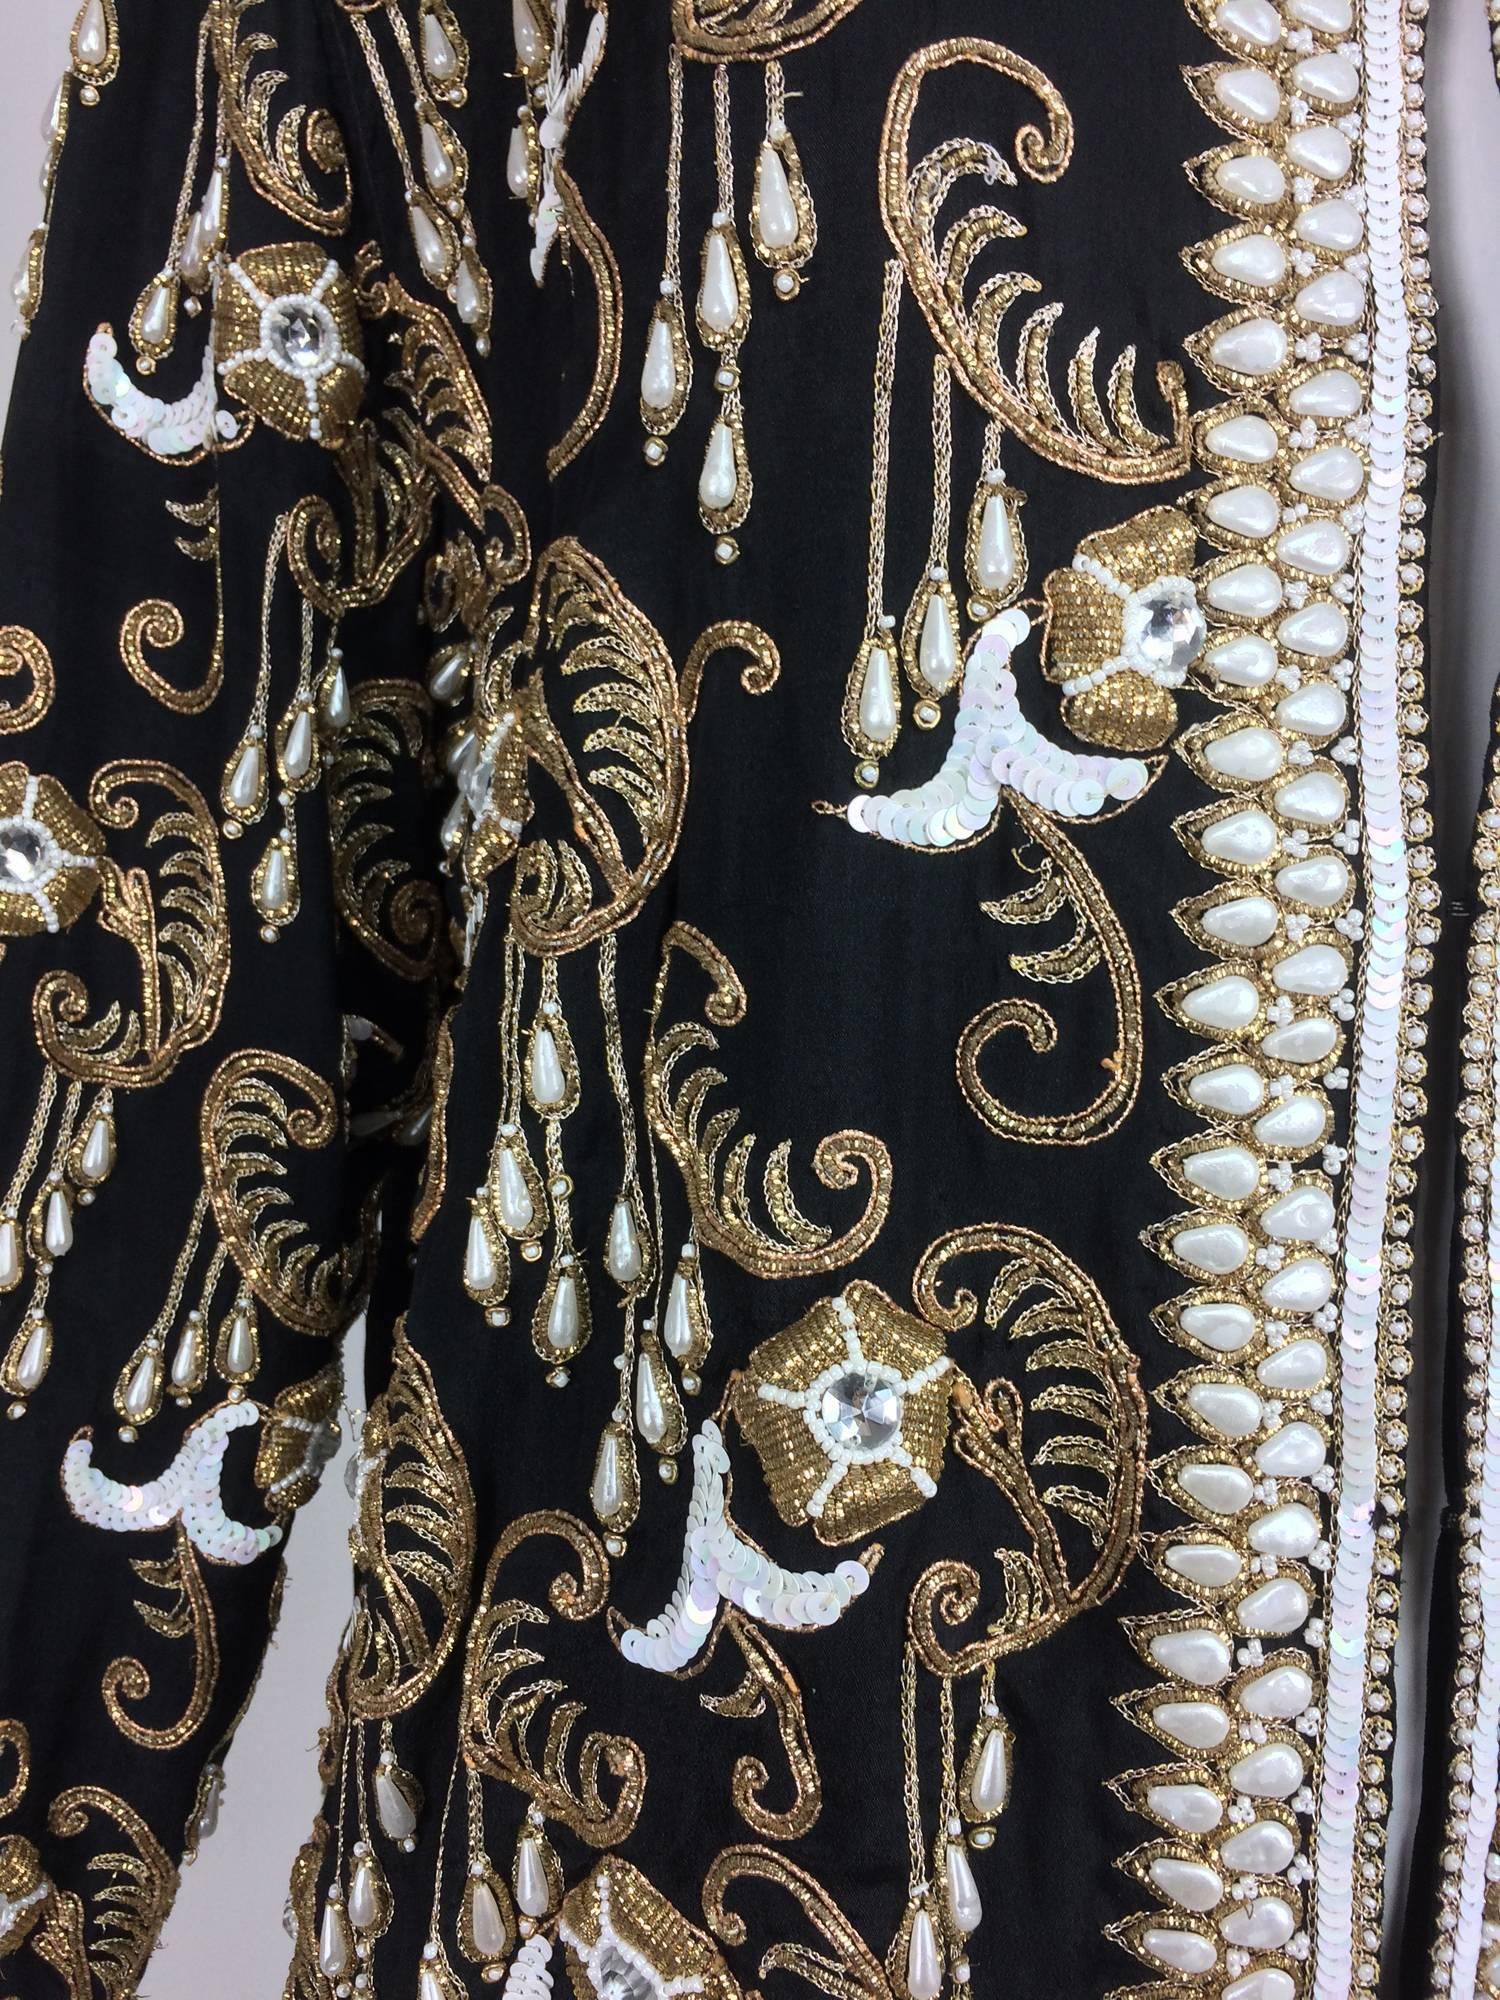 Vintage heavily beaded and embroidered black silk jacket 1990s marked size Large...Open front, jewel neck jacket with long sleeves...Embroidered with gold cord...Covered with pearls, gold beads, white and gold sequins and large rhinestones all done